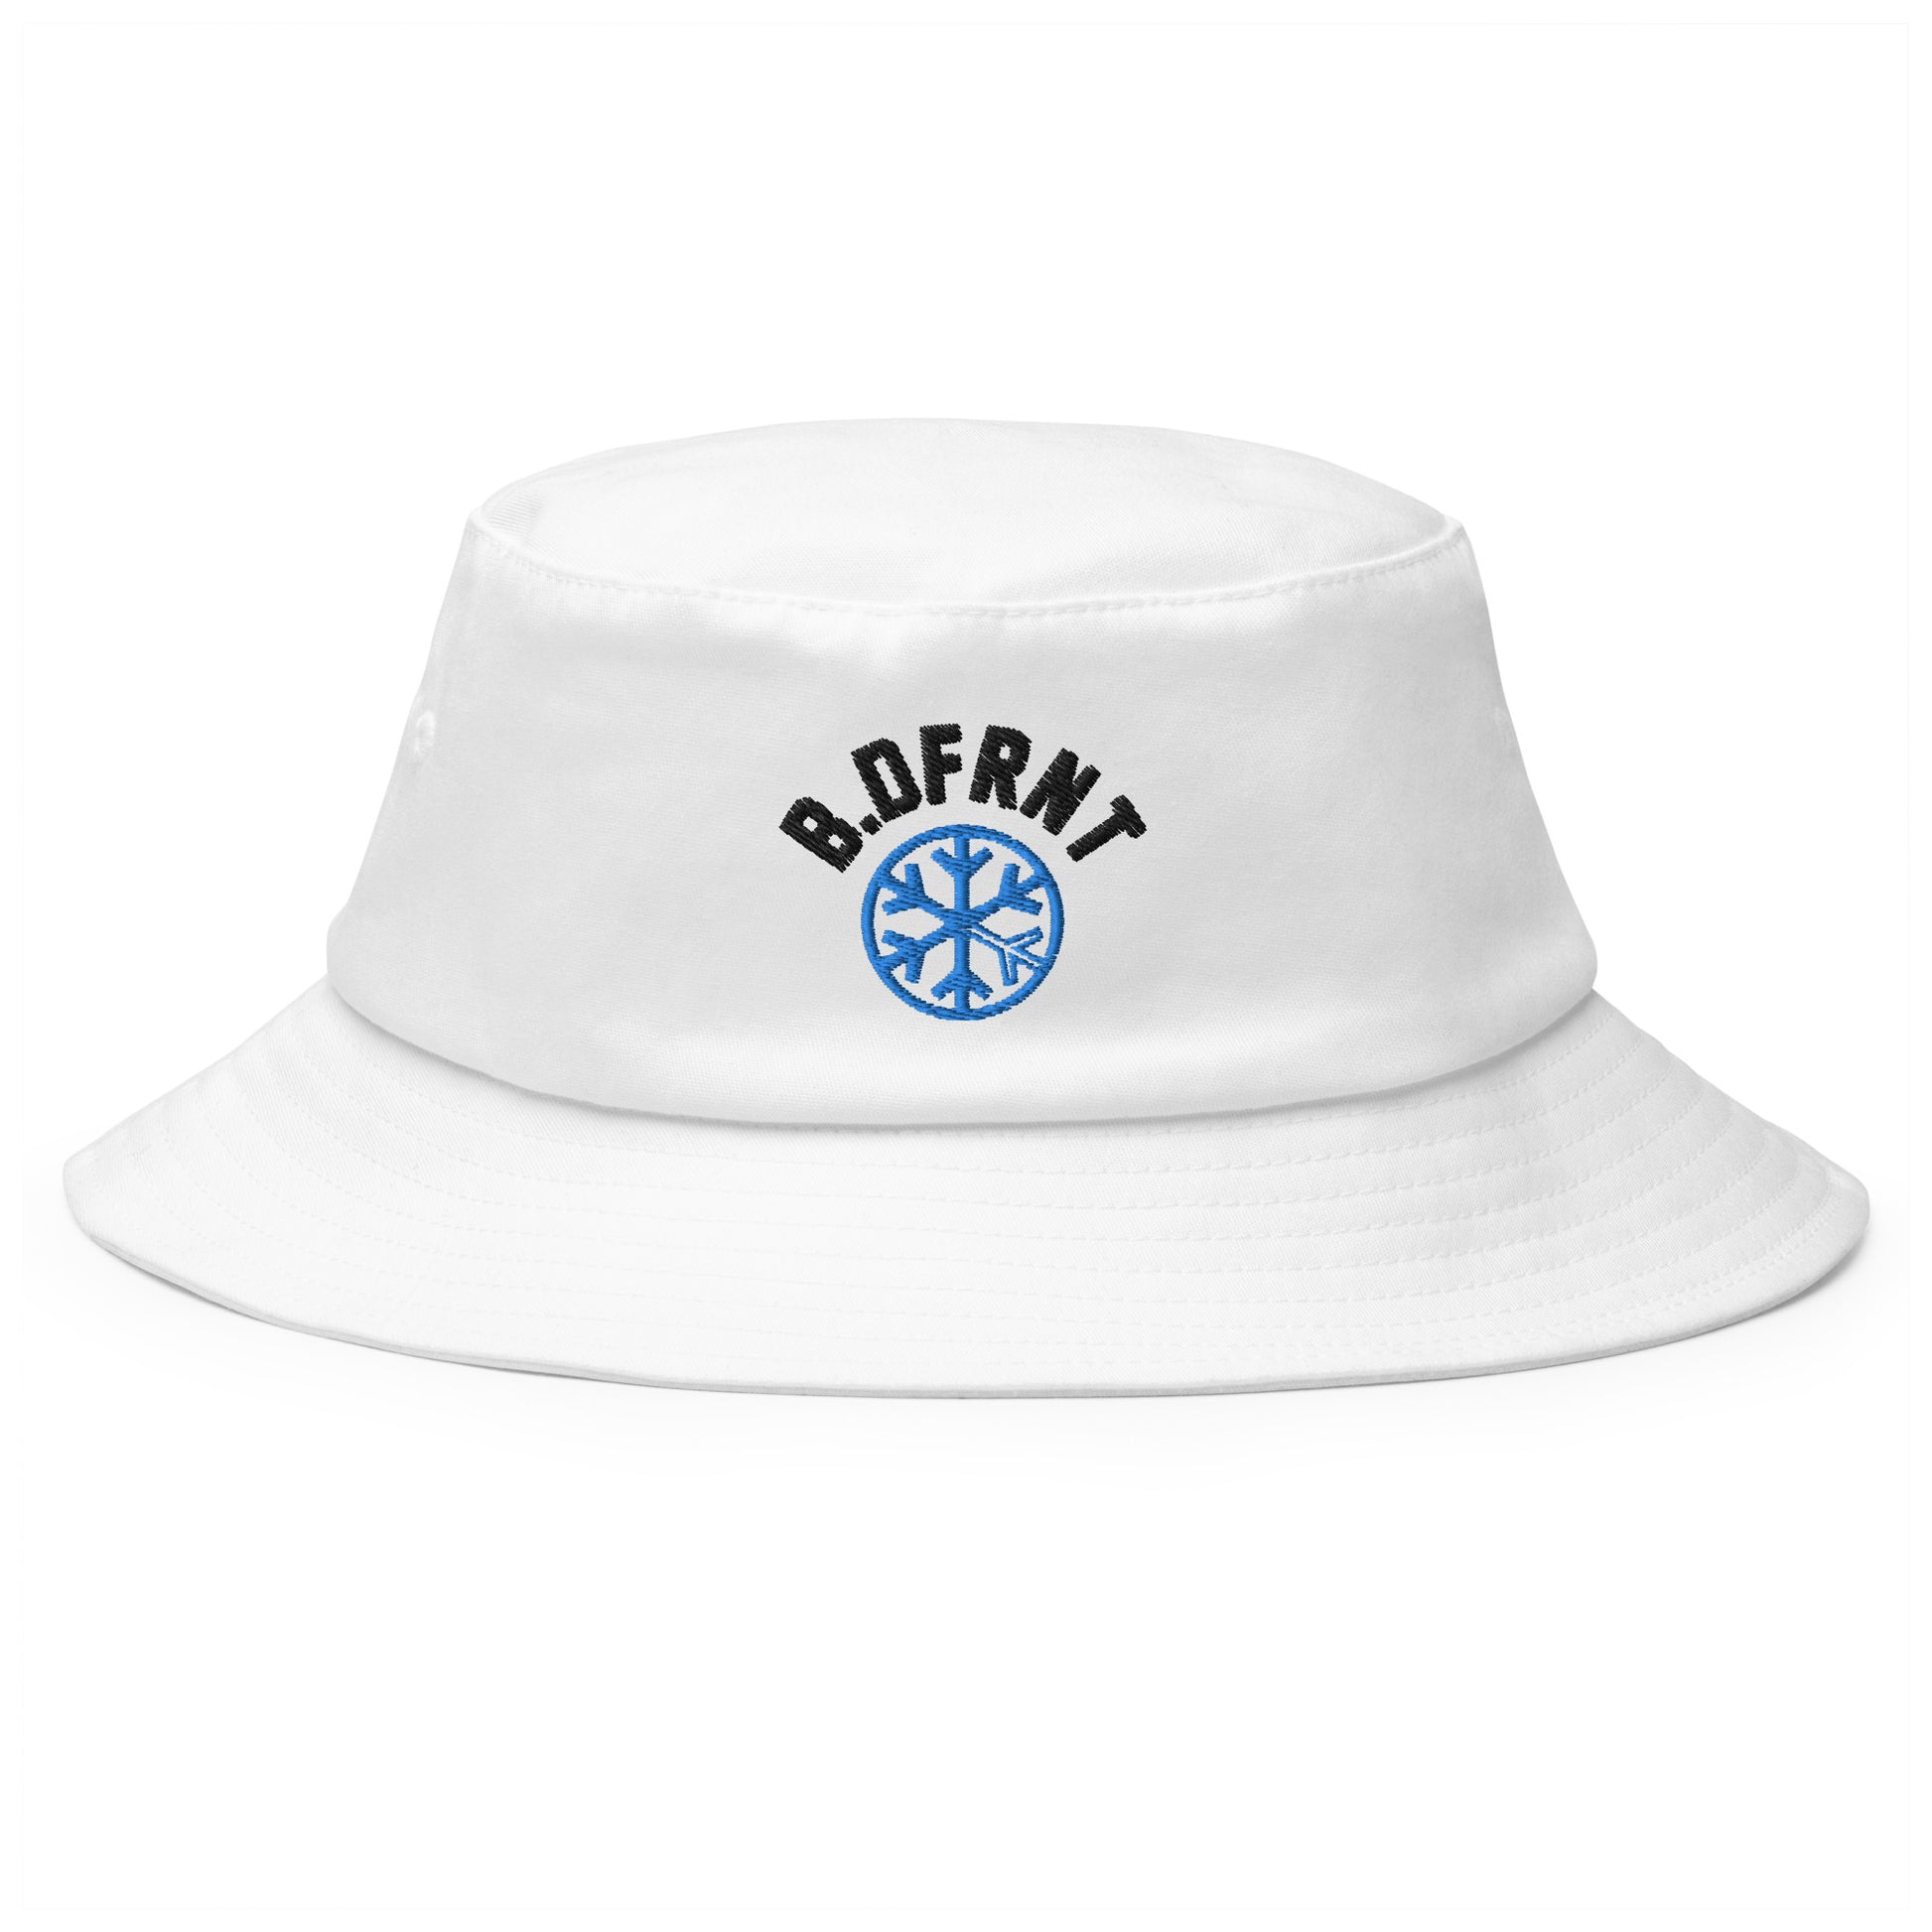 bob bucket hat white b.dfrnt by b.different clothing independent streetwear inspired by street art graffiti